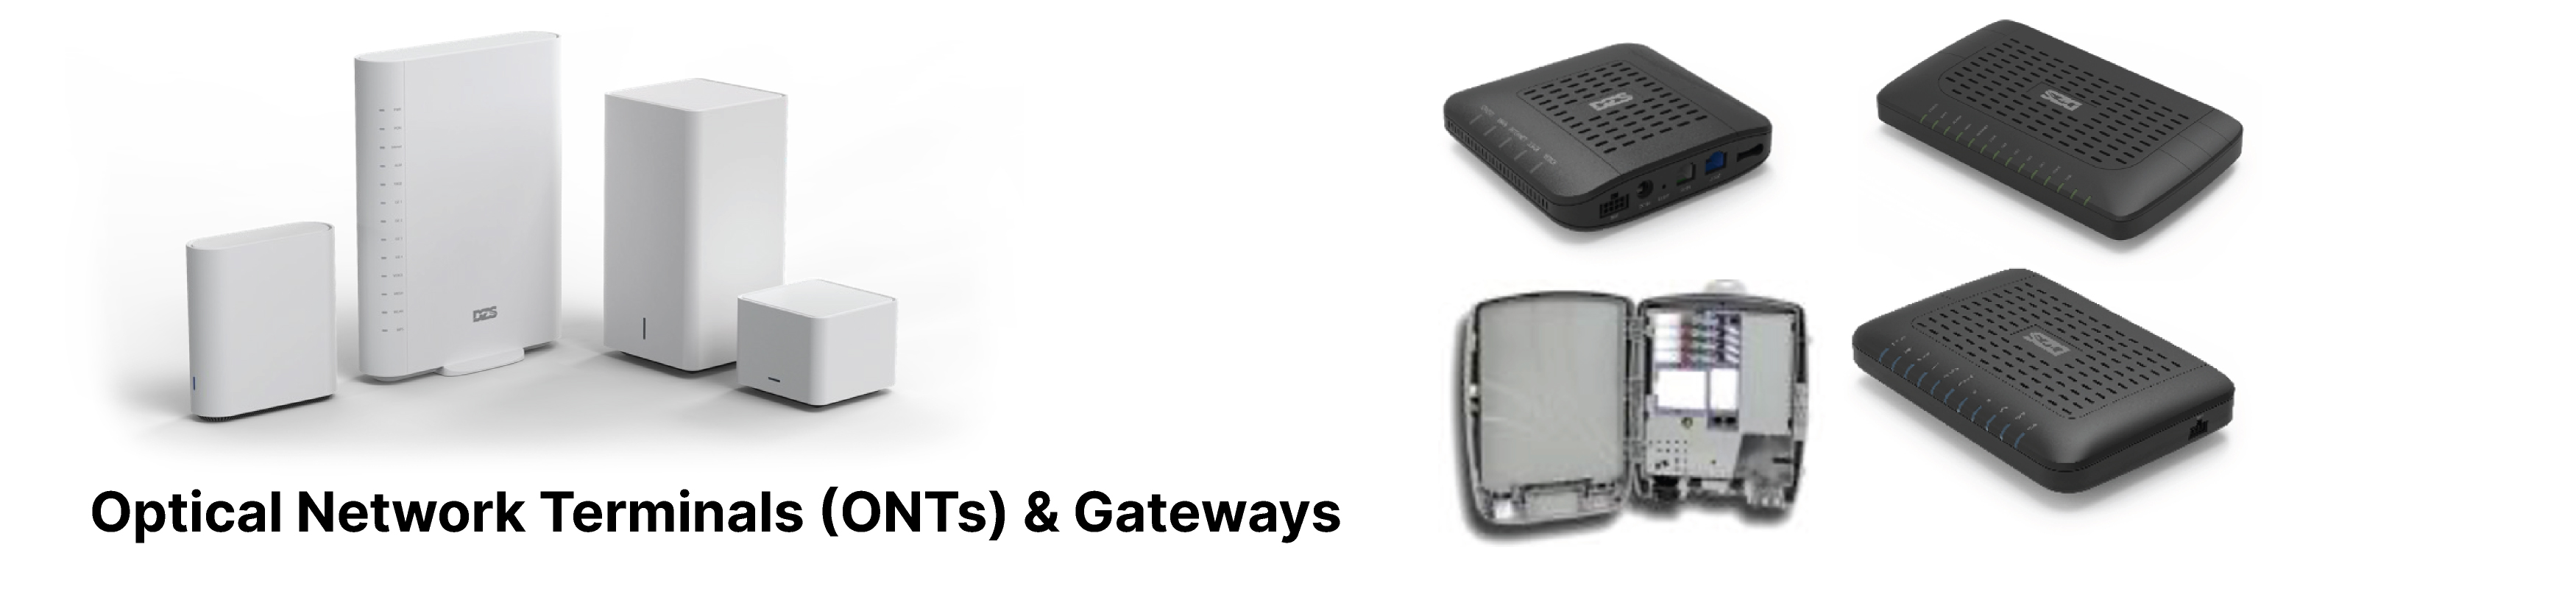 Optical Network Terminals (ONTs) and Gateways